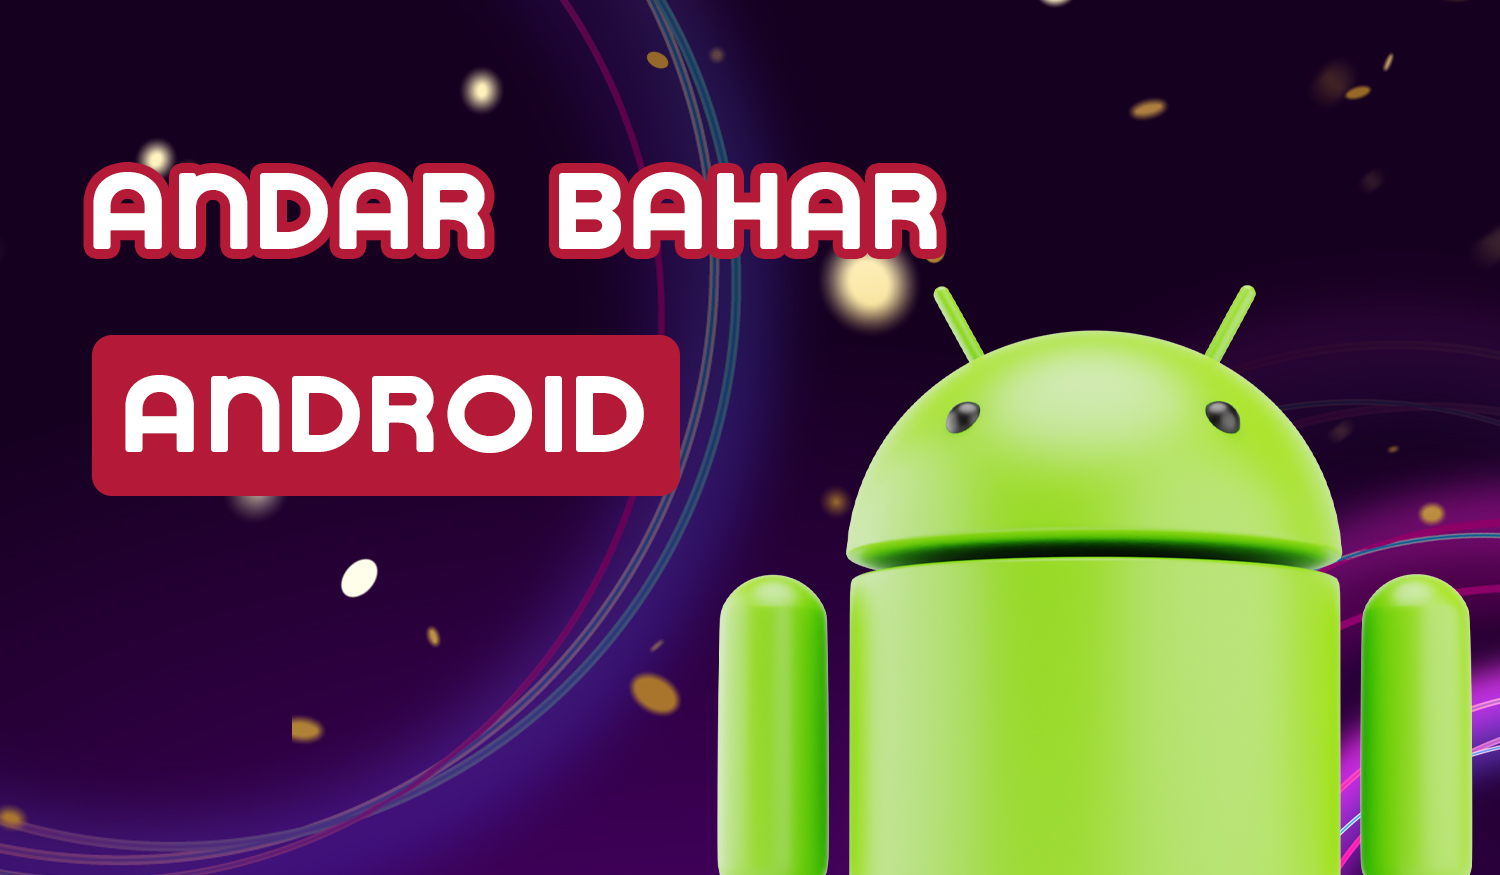 How to download and install the Android app to play Andar Bahar online